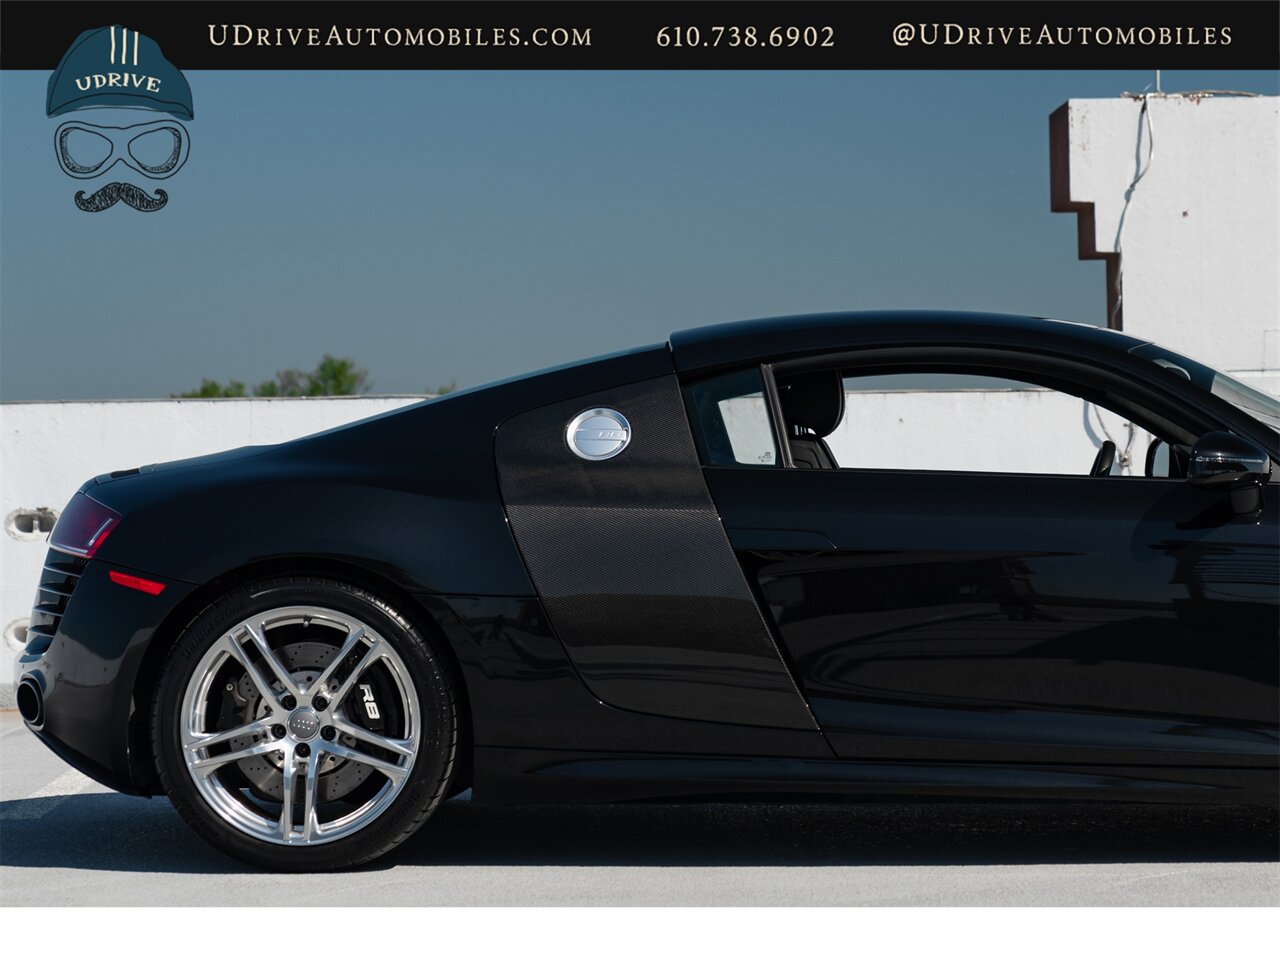 2009 Audi R8 Quattro  4.2L V8 6 Speed Manual - Photo 18 - West Chester, PA 19382